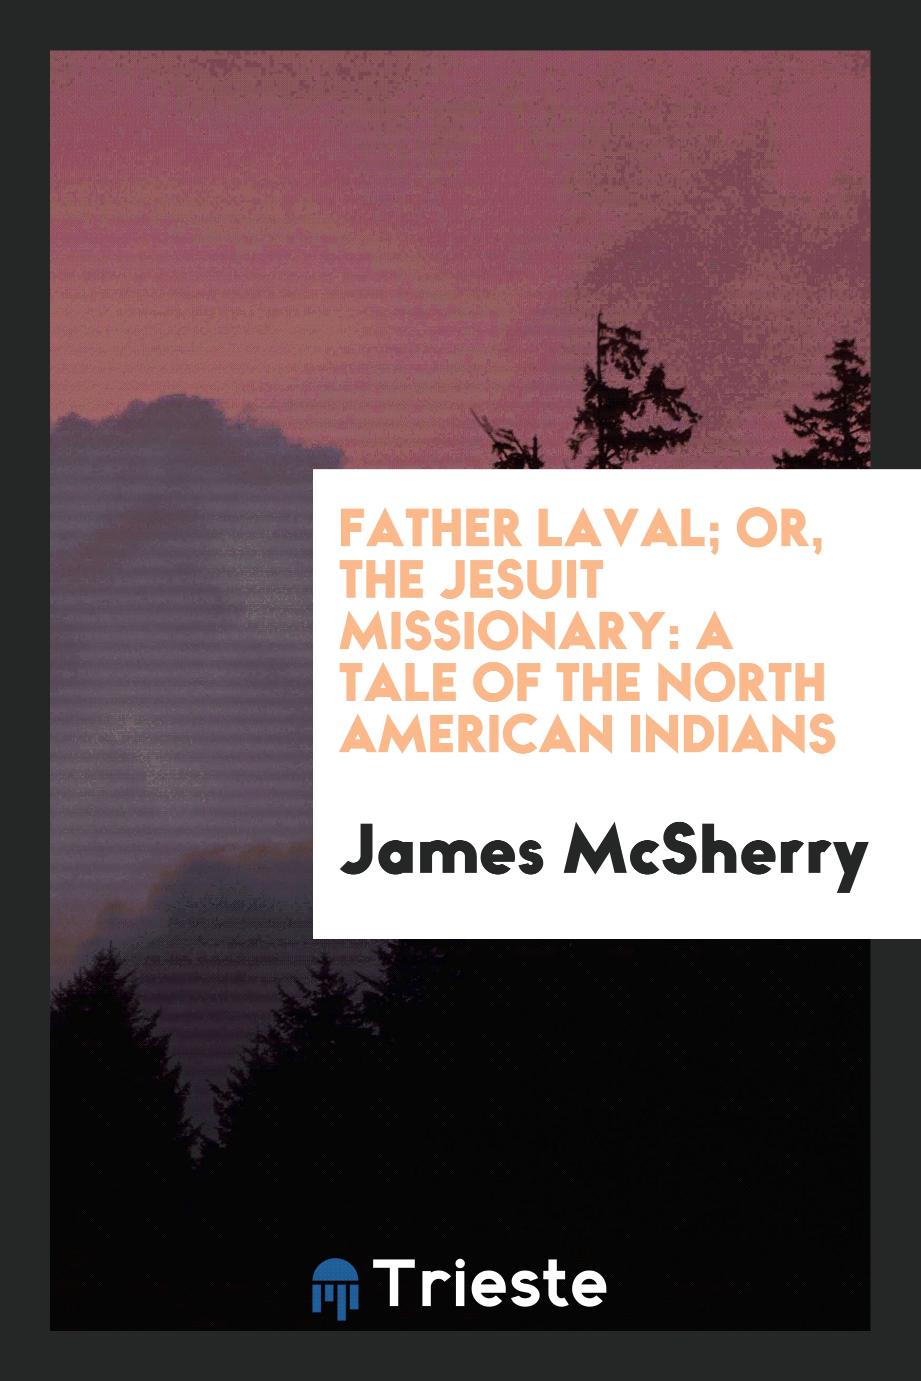 Father Laval; or, The Jesuit missionary: a tale of the North American Indians